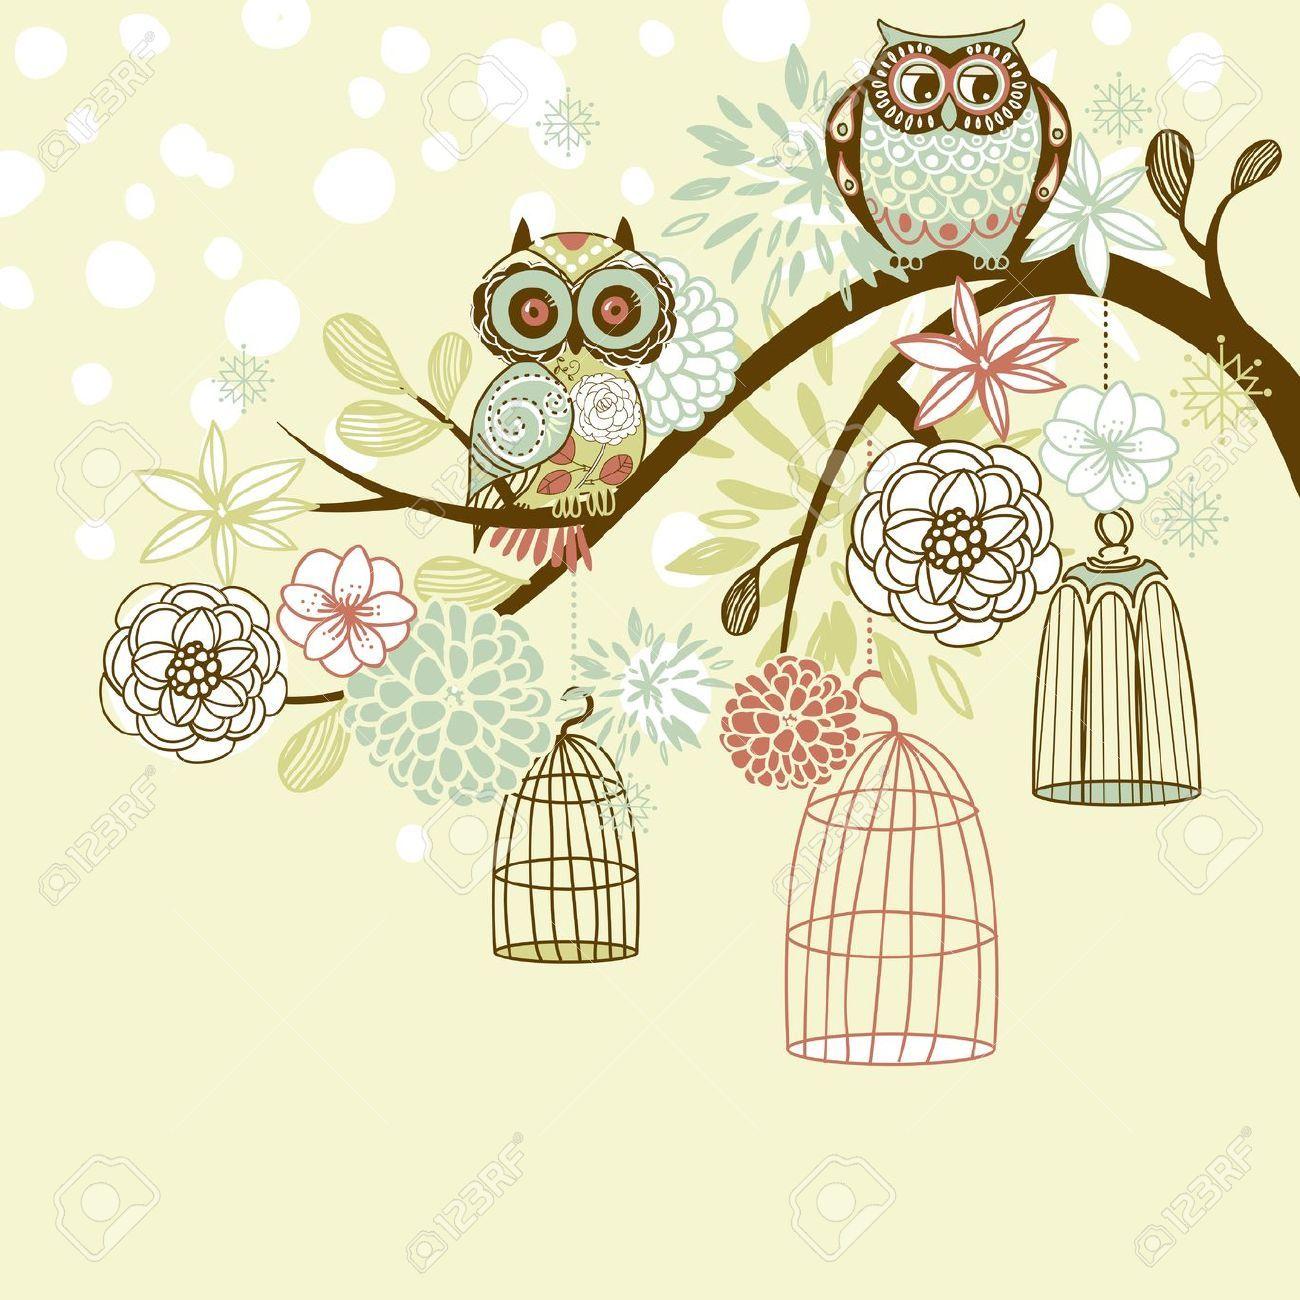 Owl Image, Royalty Free Owl Image And Picture